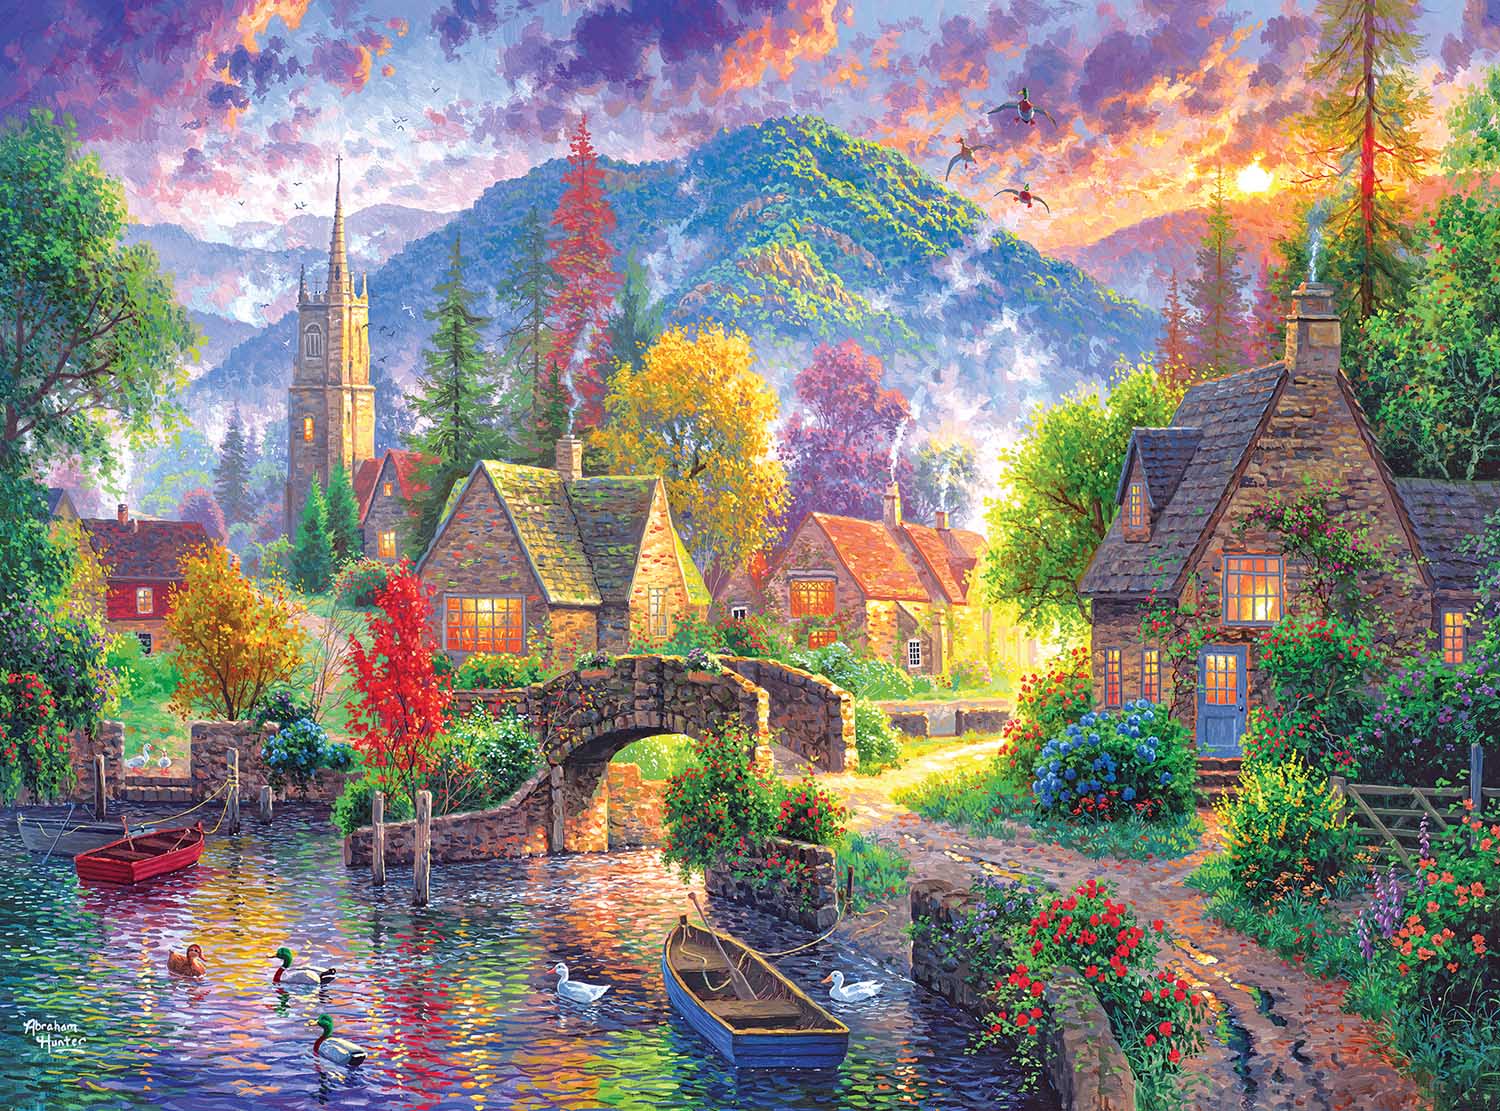 Mountain Village - Scratch and Dent Mountain Jigsaw Puzzle